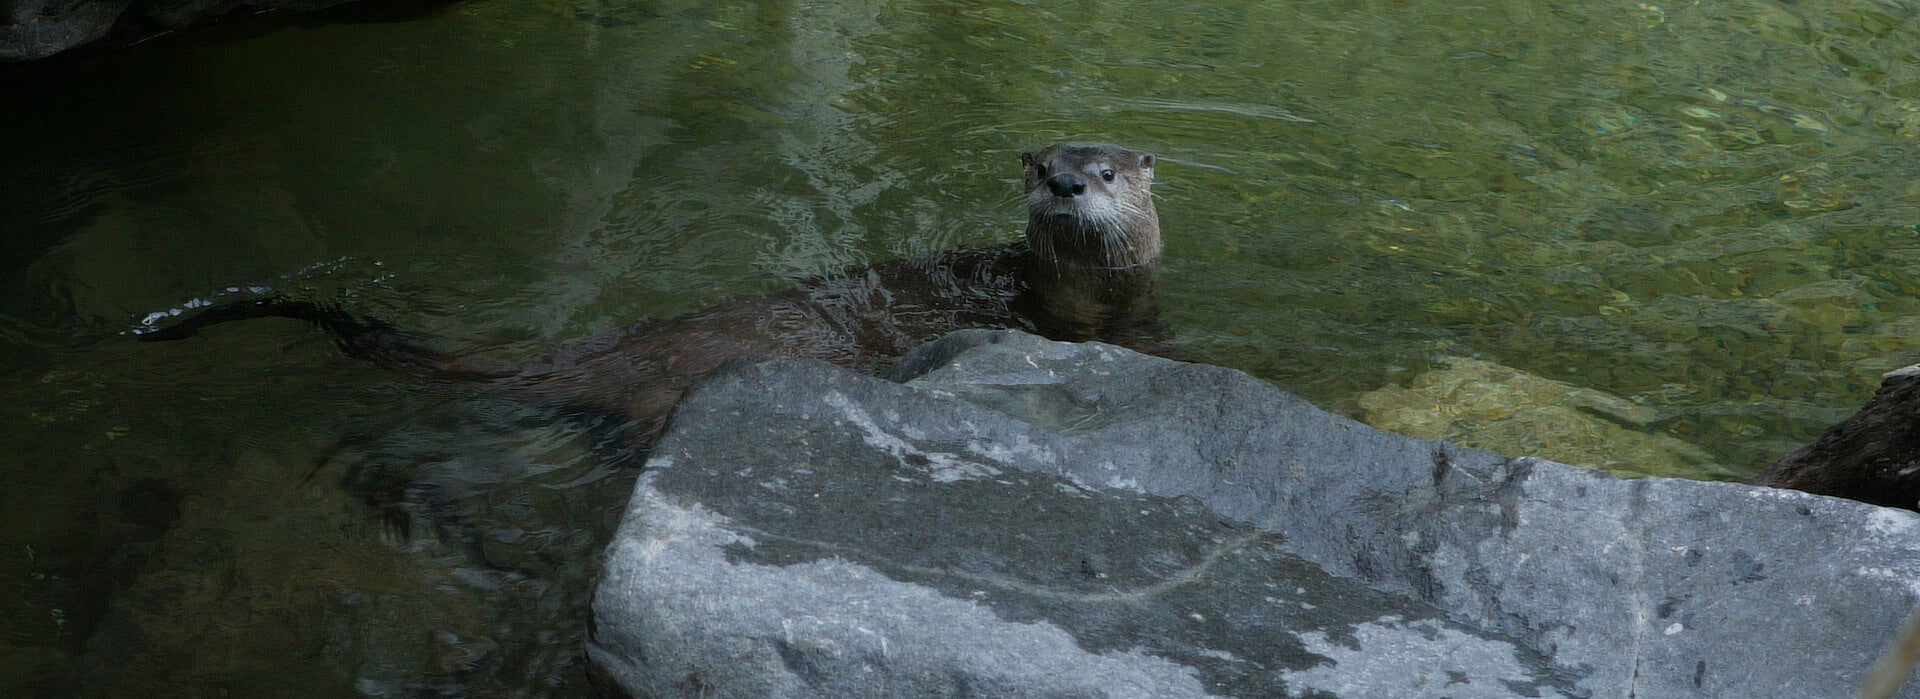 Closeup of river otter swimming in rocky nook of river bed amid clear water, Trinity Mountain wilderness, California.